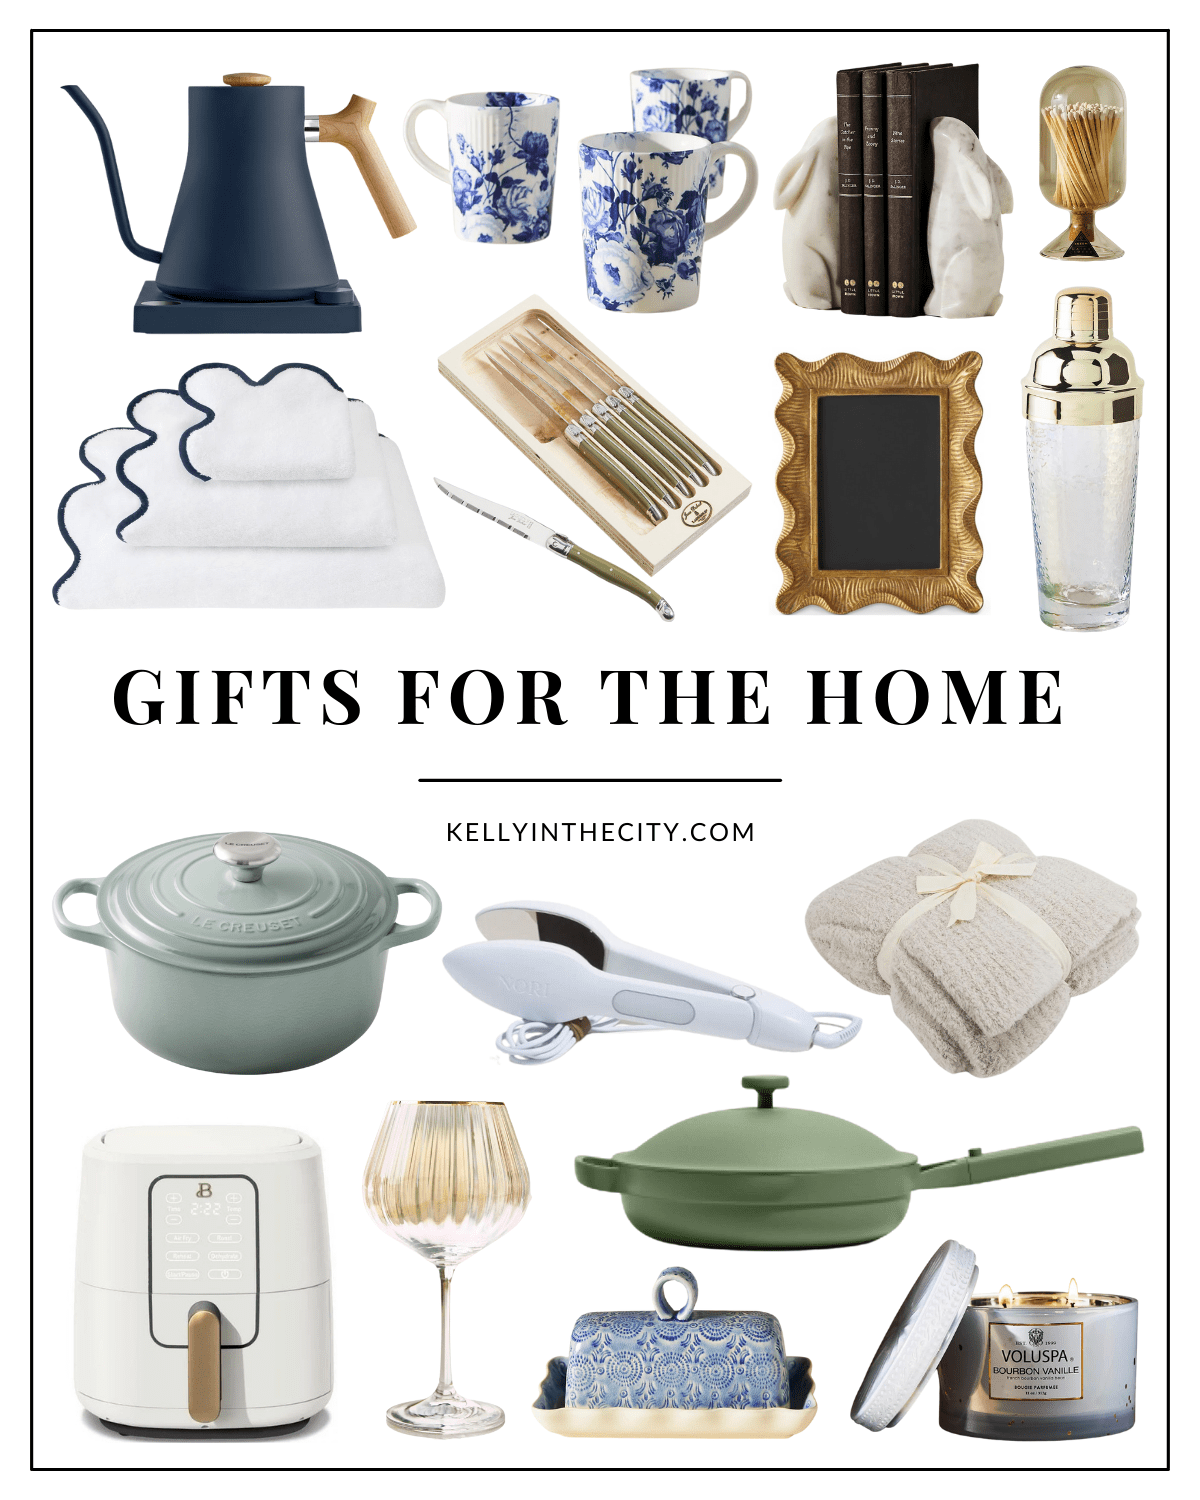 Gifts for the Home